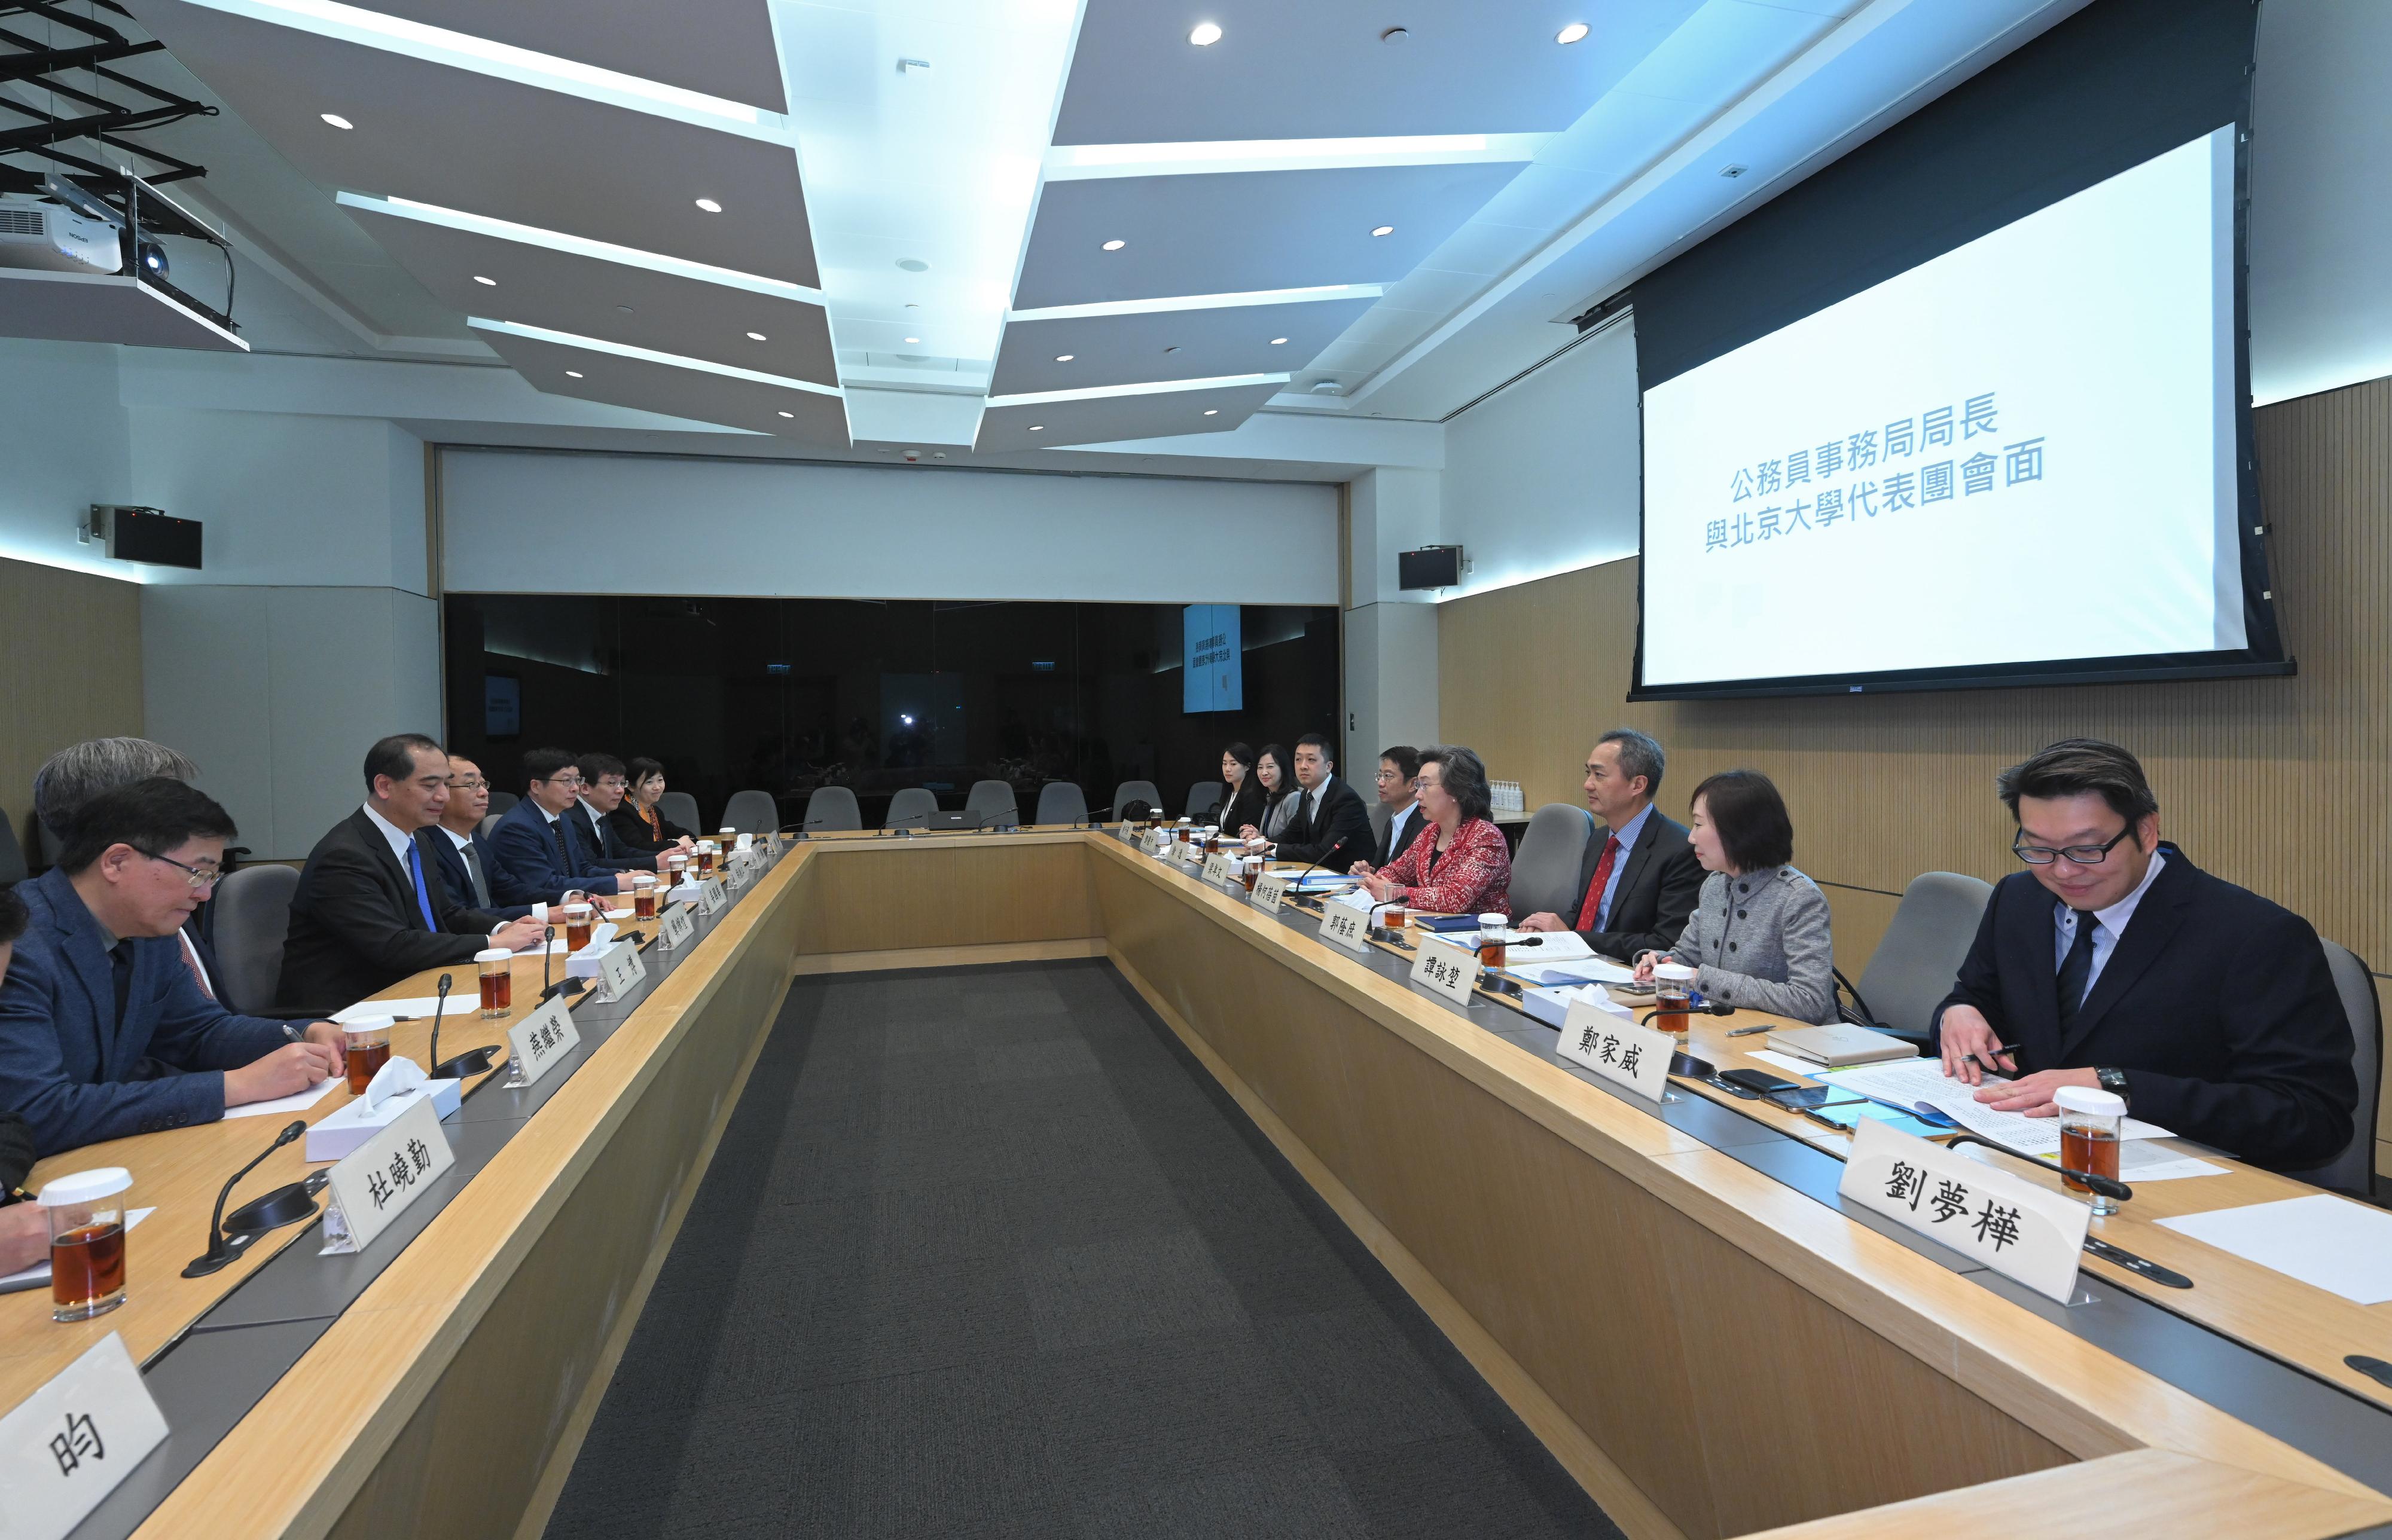 The Secretary for the Civil Service, Mrs Ingrid Yeung (fourth right), met with the delegation from Peking University led by its President, Mr Gong Qihuang (third left), at the Central Government Offices today (March 3) to exchange views on civil service training for the Hong Kong Special Administrative Region Government. Photo shows Mrs Yeung introducing to the delegation the major initiatives of civil service training. Both sides also discussed future collaboration plans. The Permanent Secretary for the Civil Service, Mr Clement Leung (fifth right), and the Head of the Civil Service College, Mr Oscar Kwok (third right), also joined the meeting. 